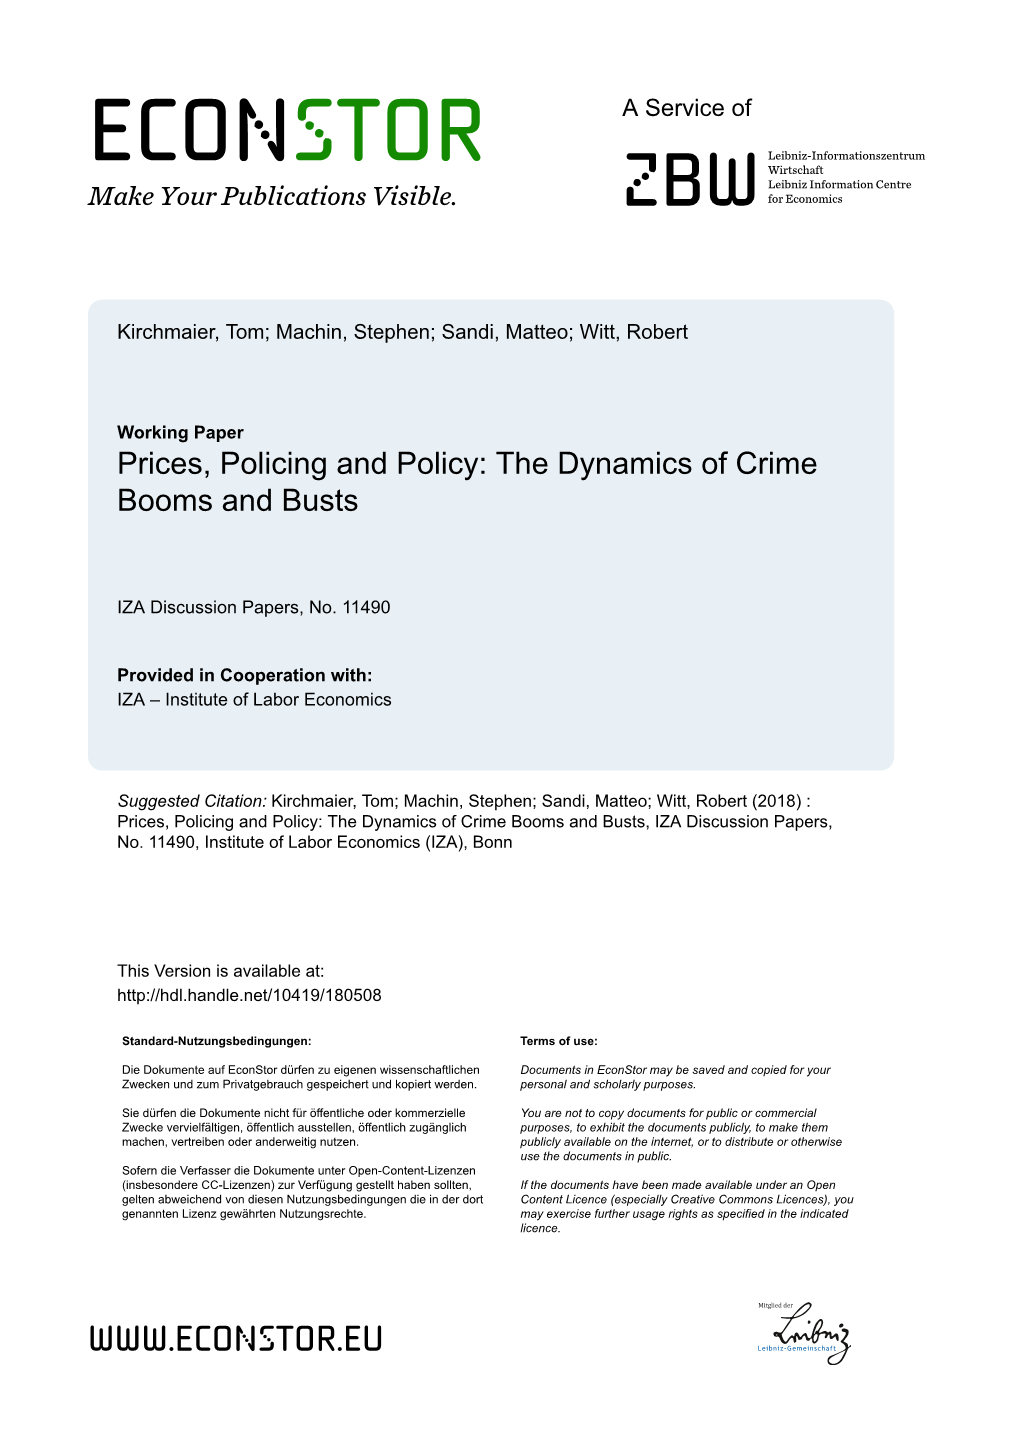 Prices, Policing and Policy: the Dynamics of Crime Booms and Busts